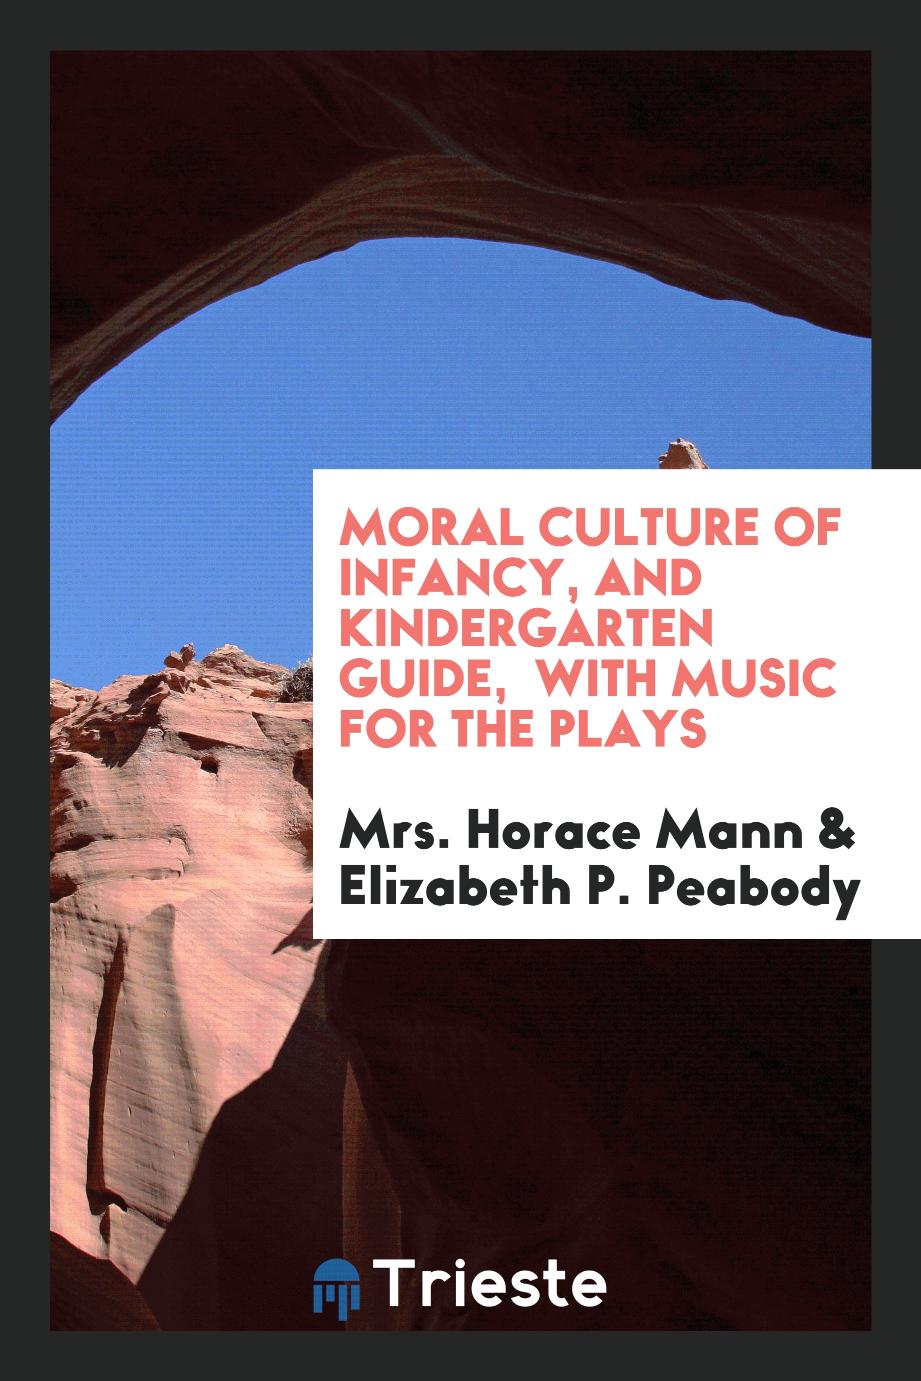 Moral culture of infancy, and kindergarten guide, with music for the plays